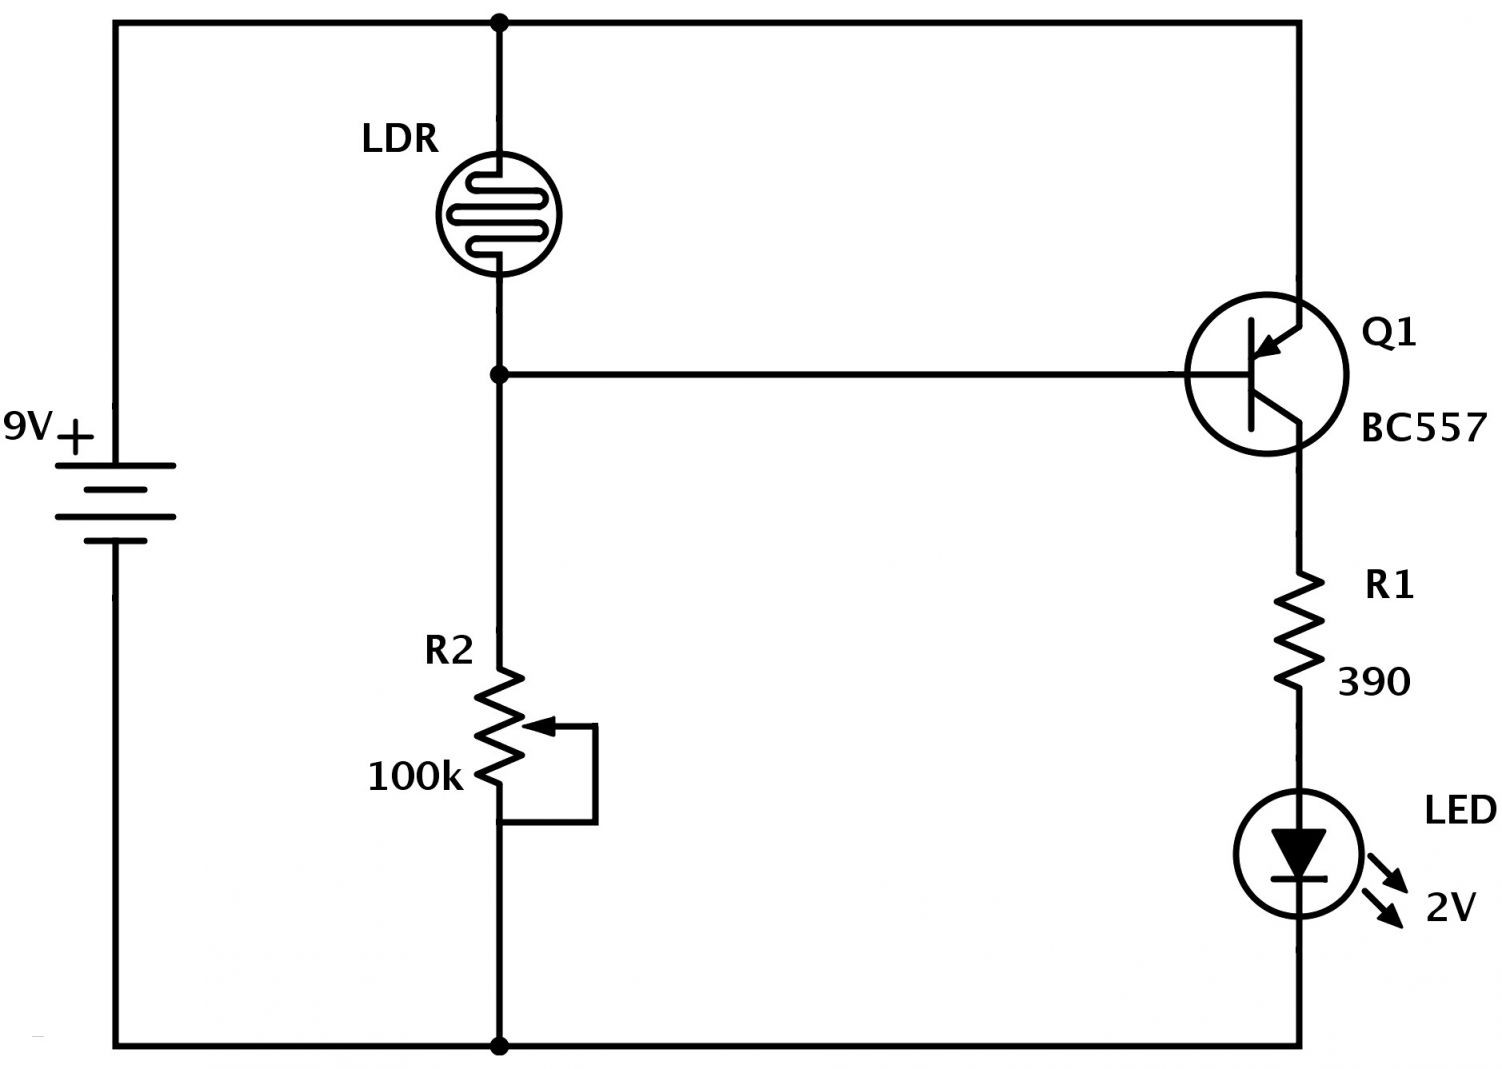 Well Known Diagram An Electrical Circuit New Ponent Series Circuit Diagrams Building Electrical Circuit cq9